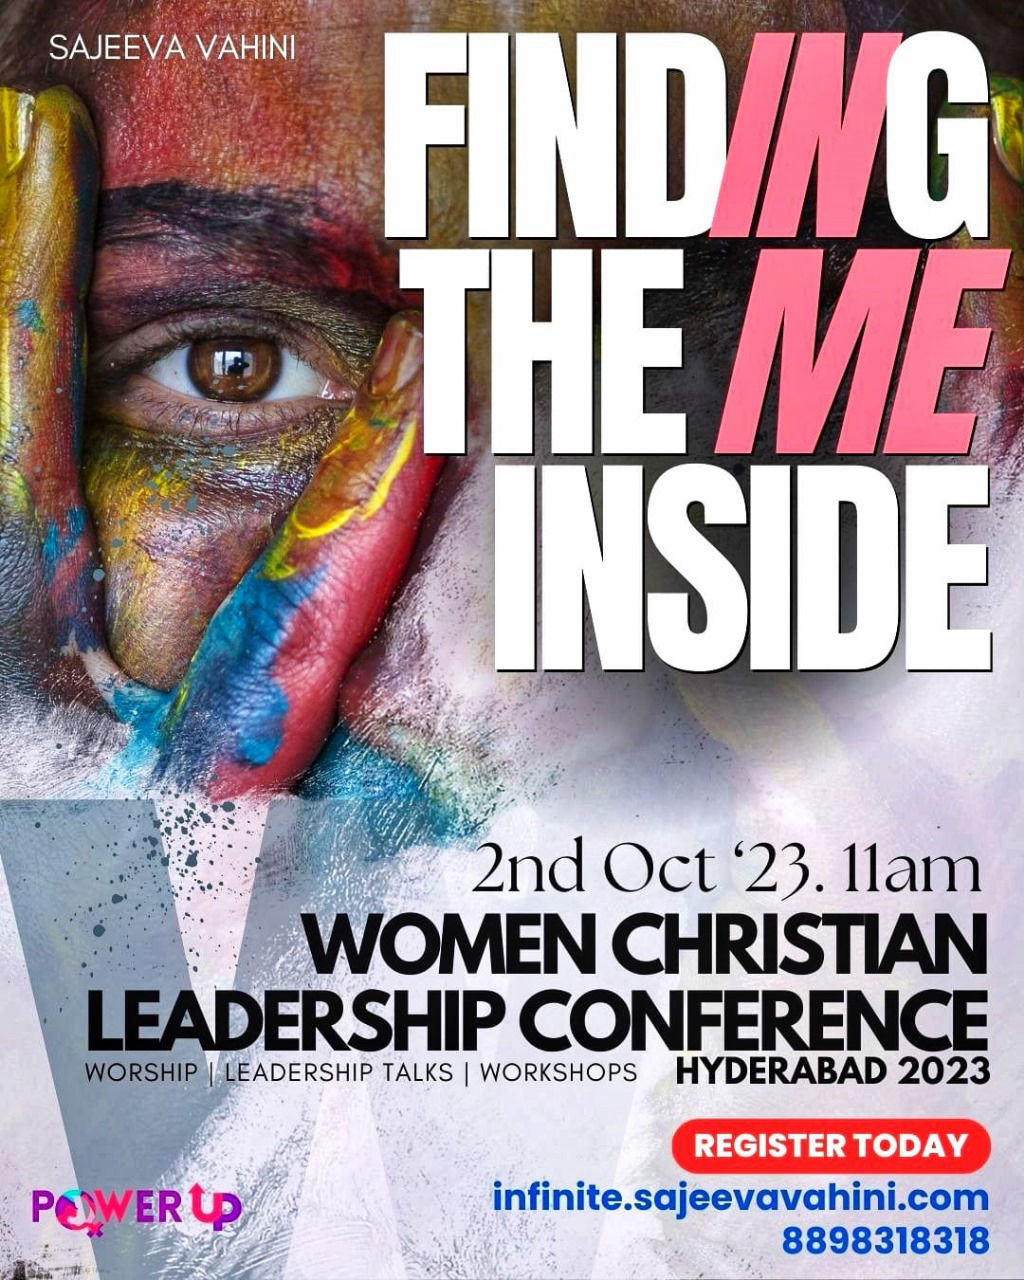 Women Christian Leadership Conference